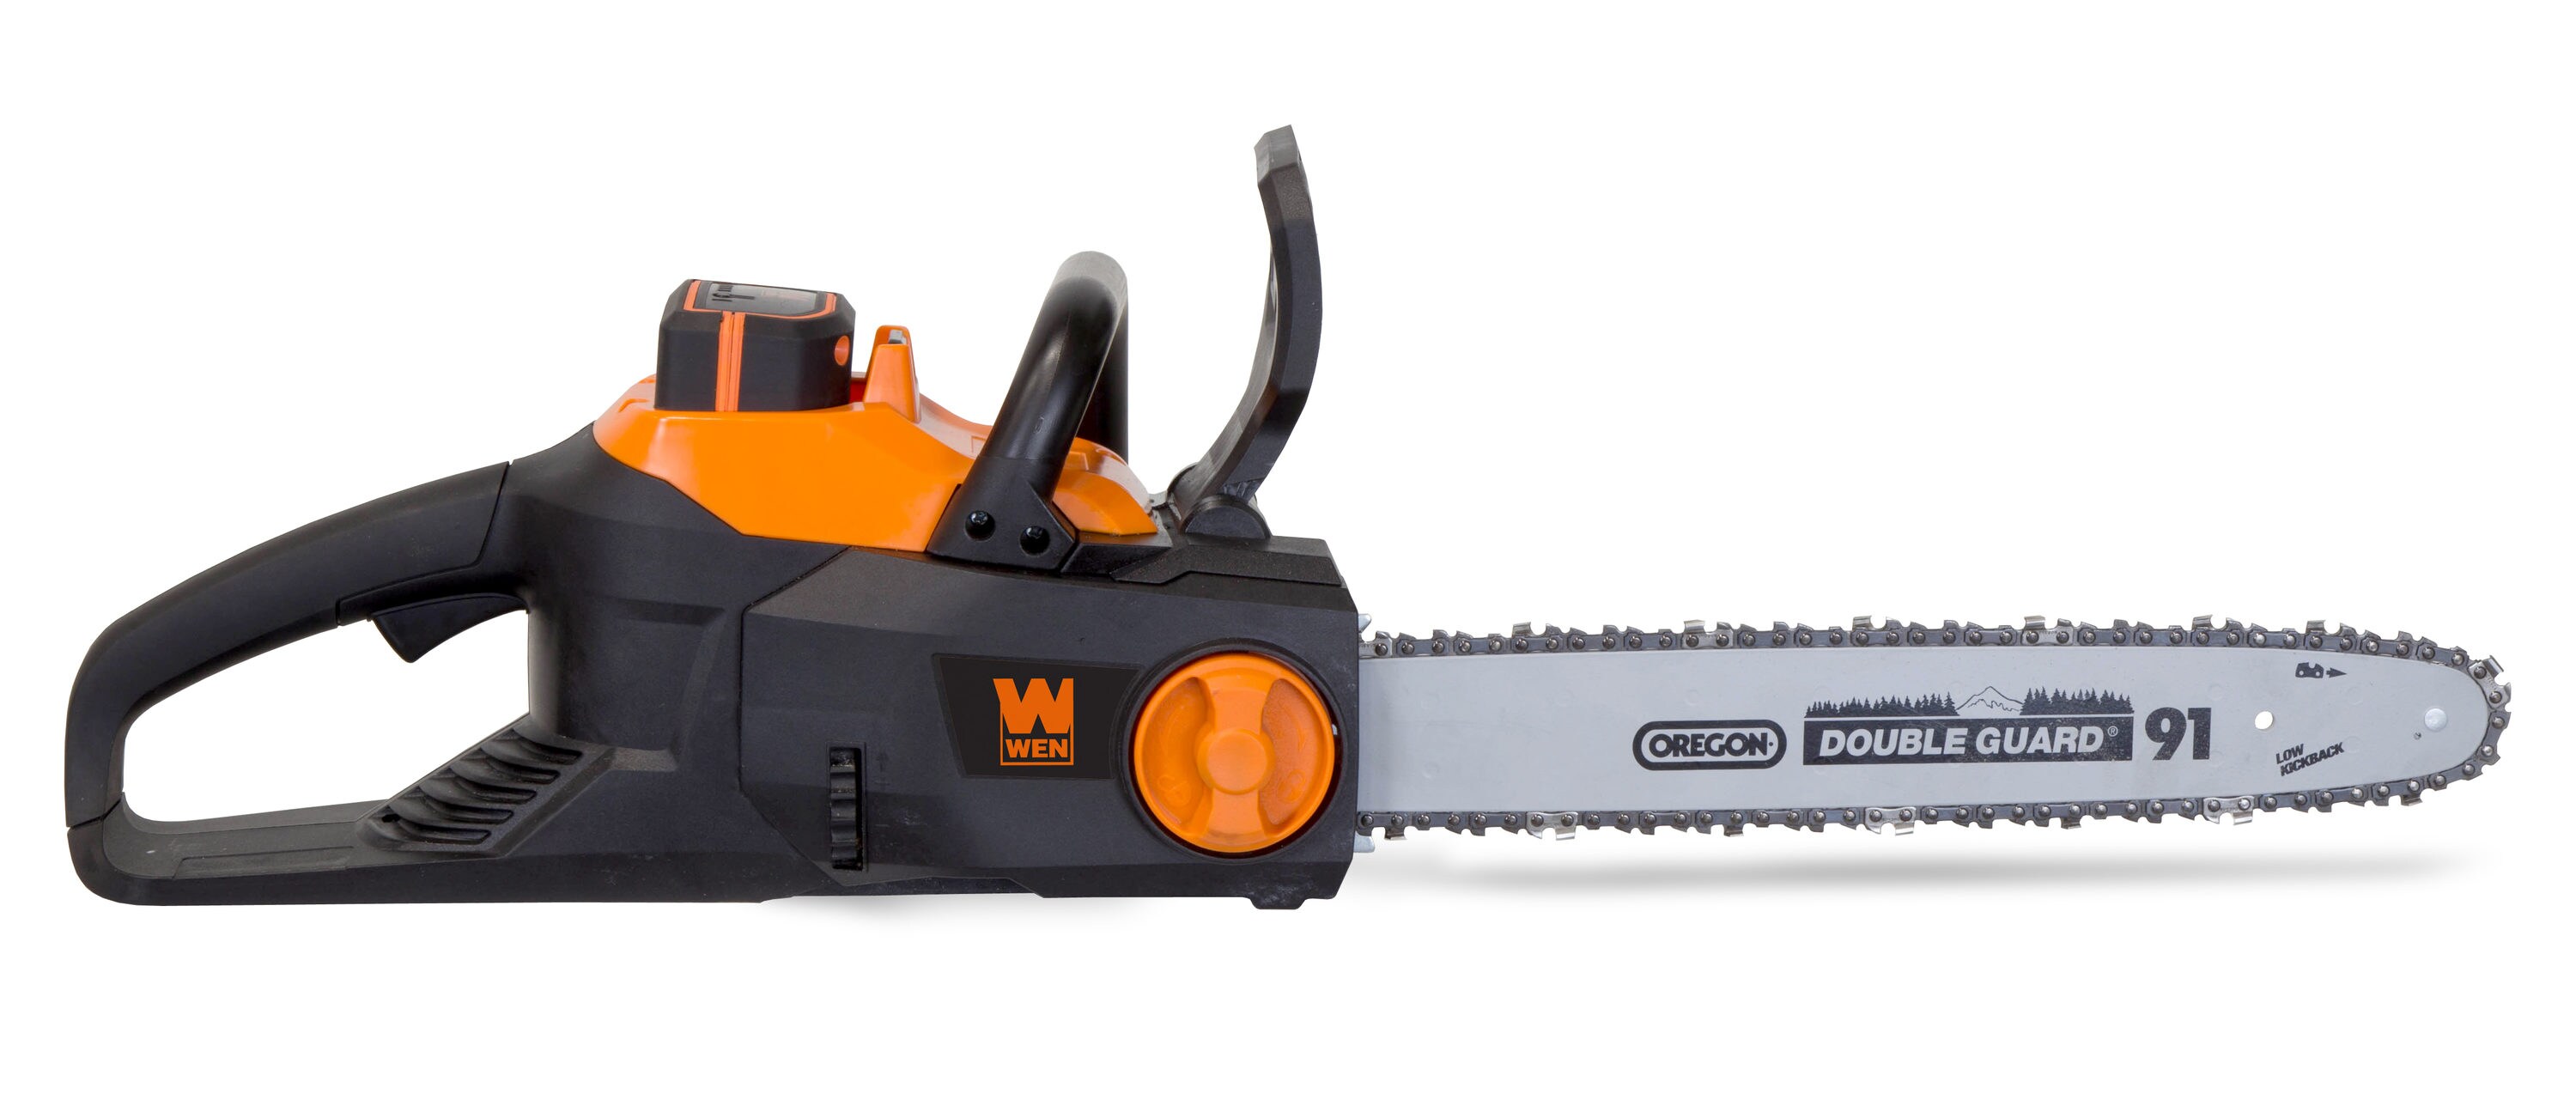 WEN 40-volt Max 16-in Brushless Cordless Electric Chainsaw 4 Ah (Battery & Charger Included)